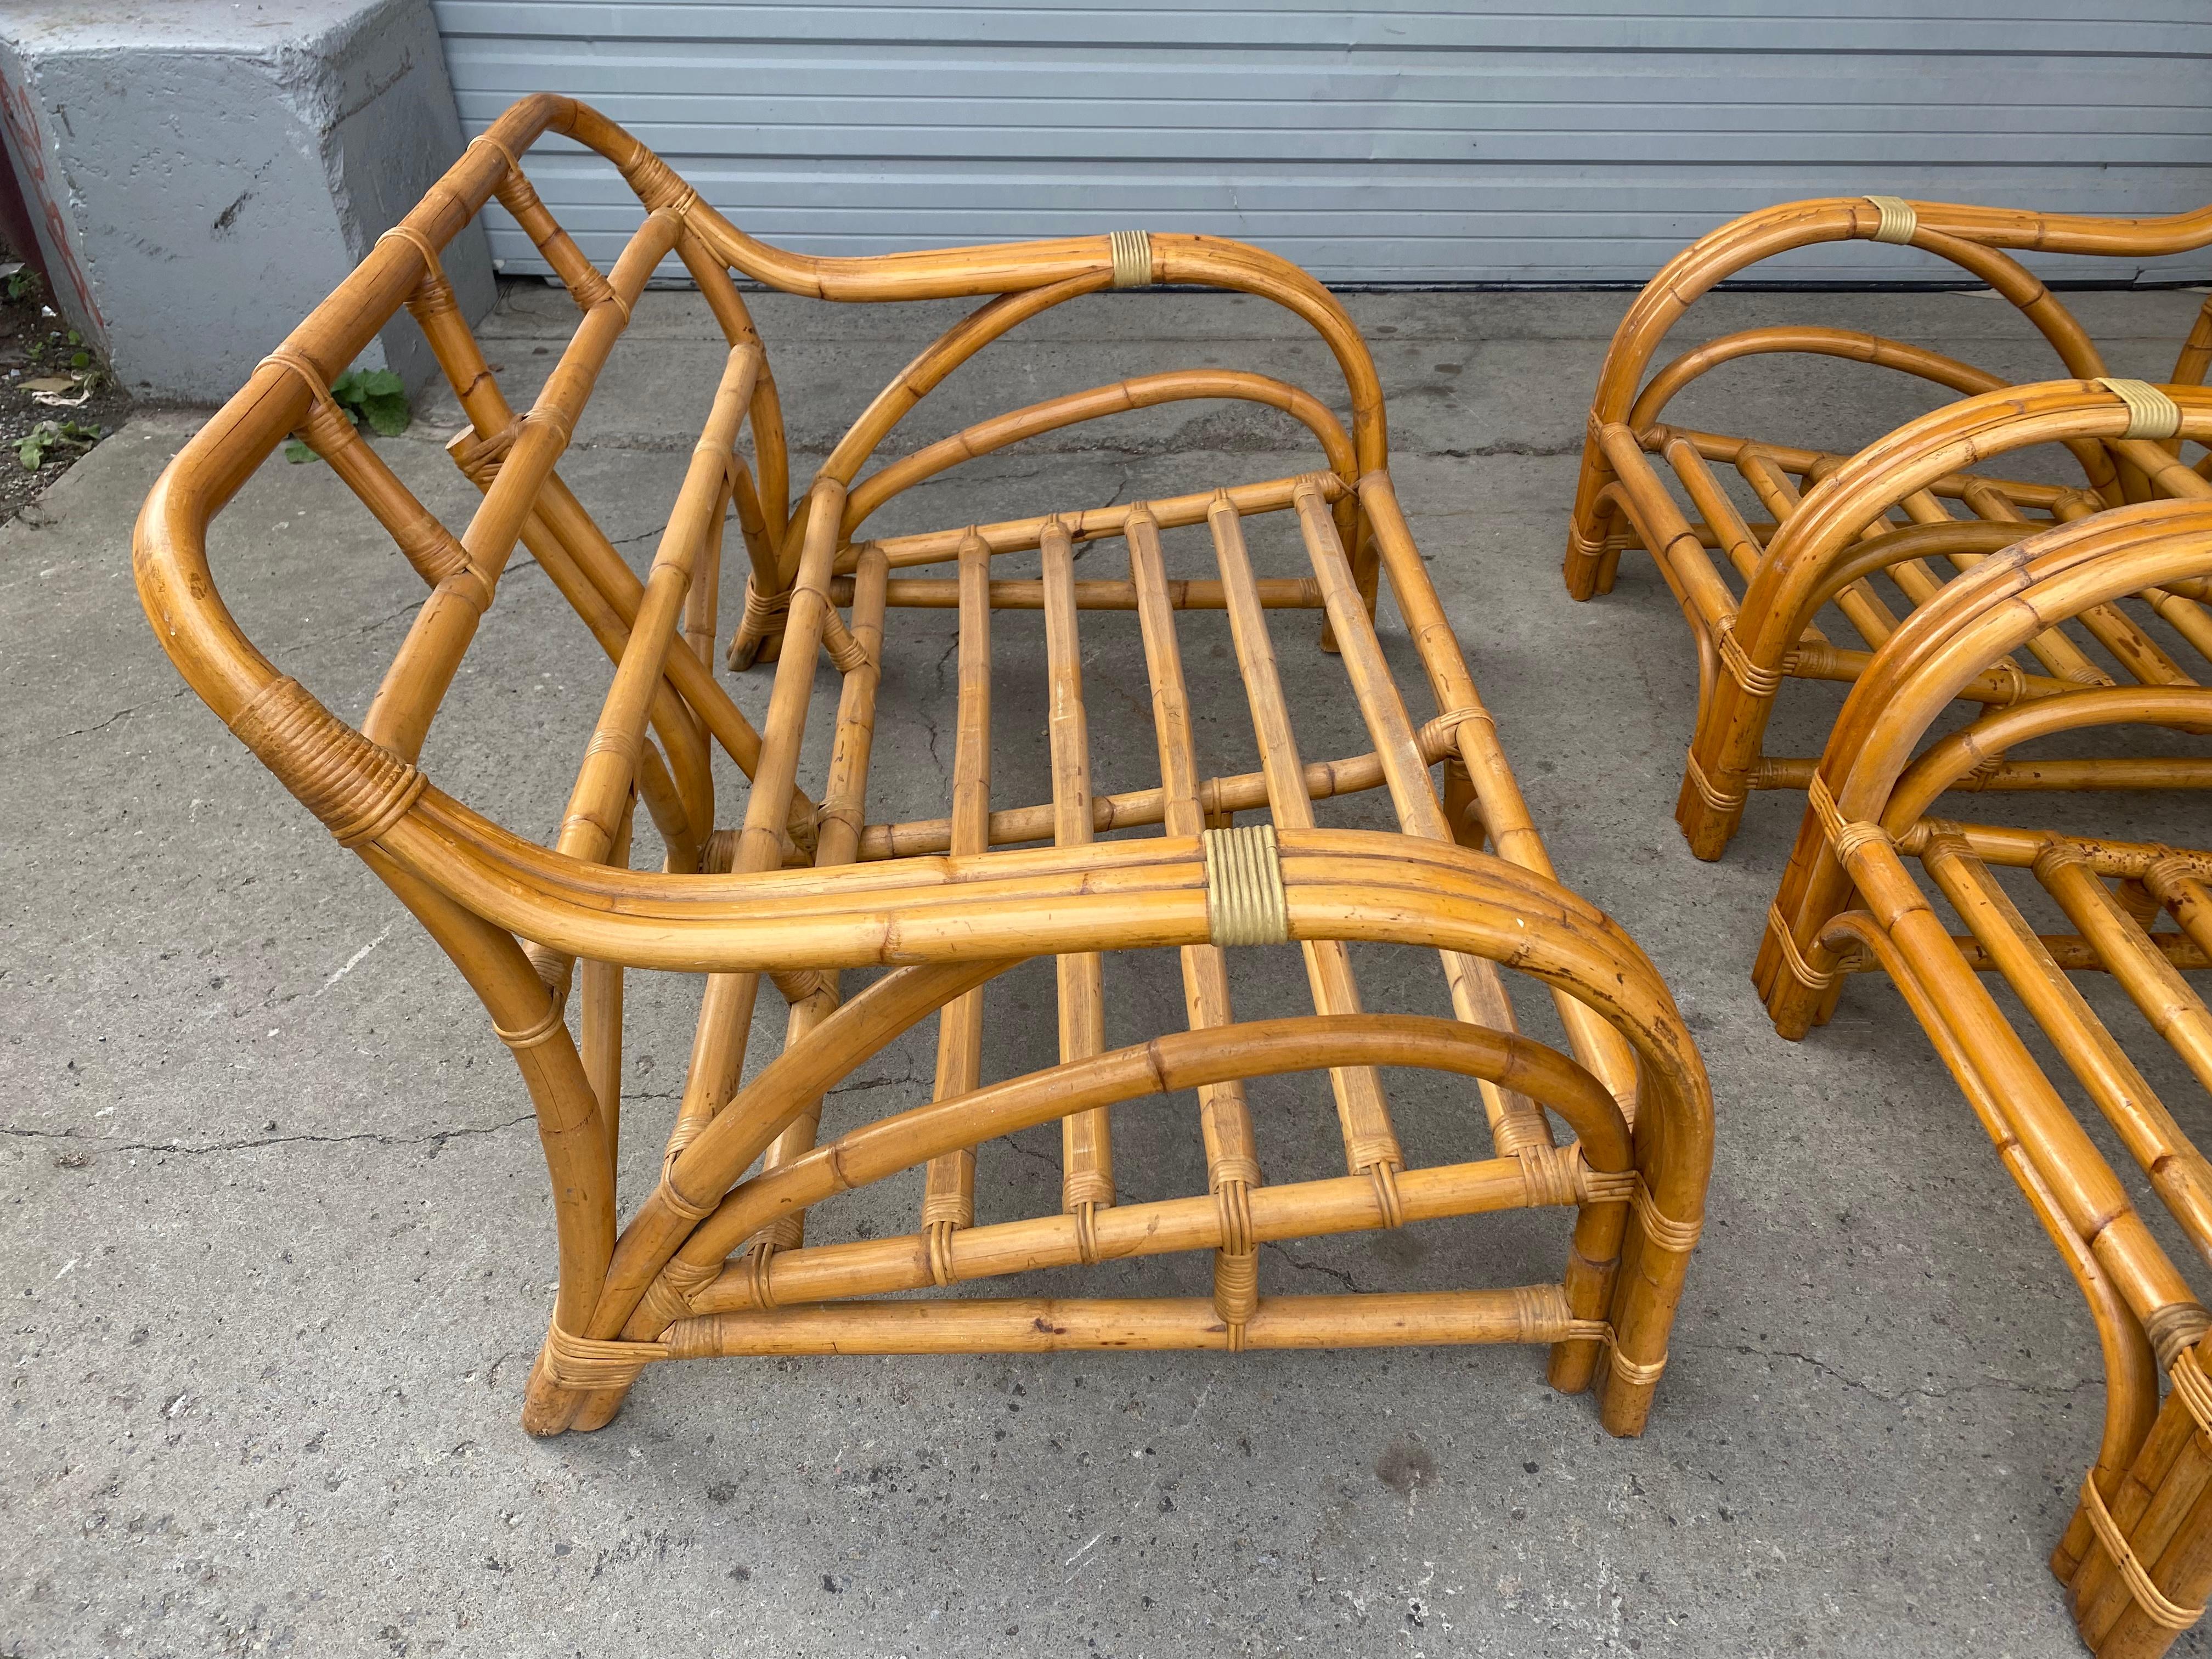 Streamline Art Deco / Modernist 3-Piece bamboo set by Rattan Art / Philippines, stunning set, amazing design, superior quality and construction, chairs measure 29